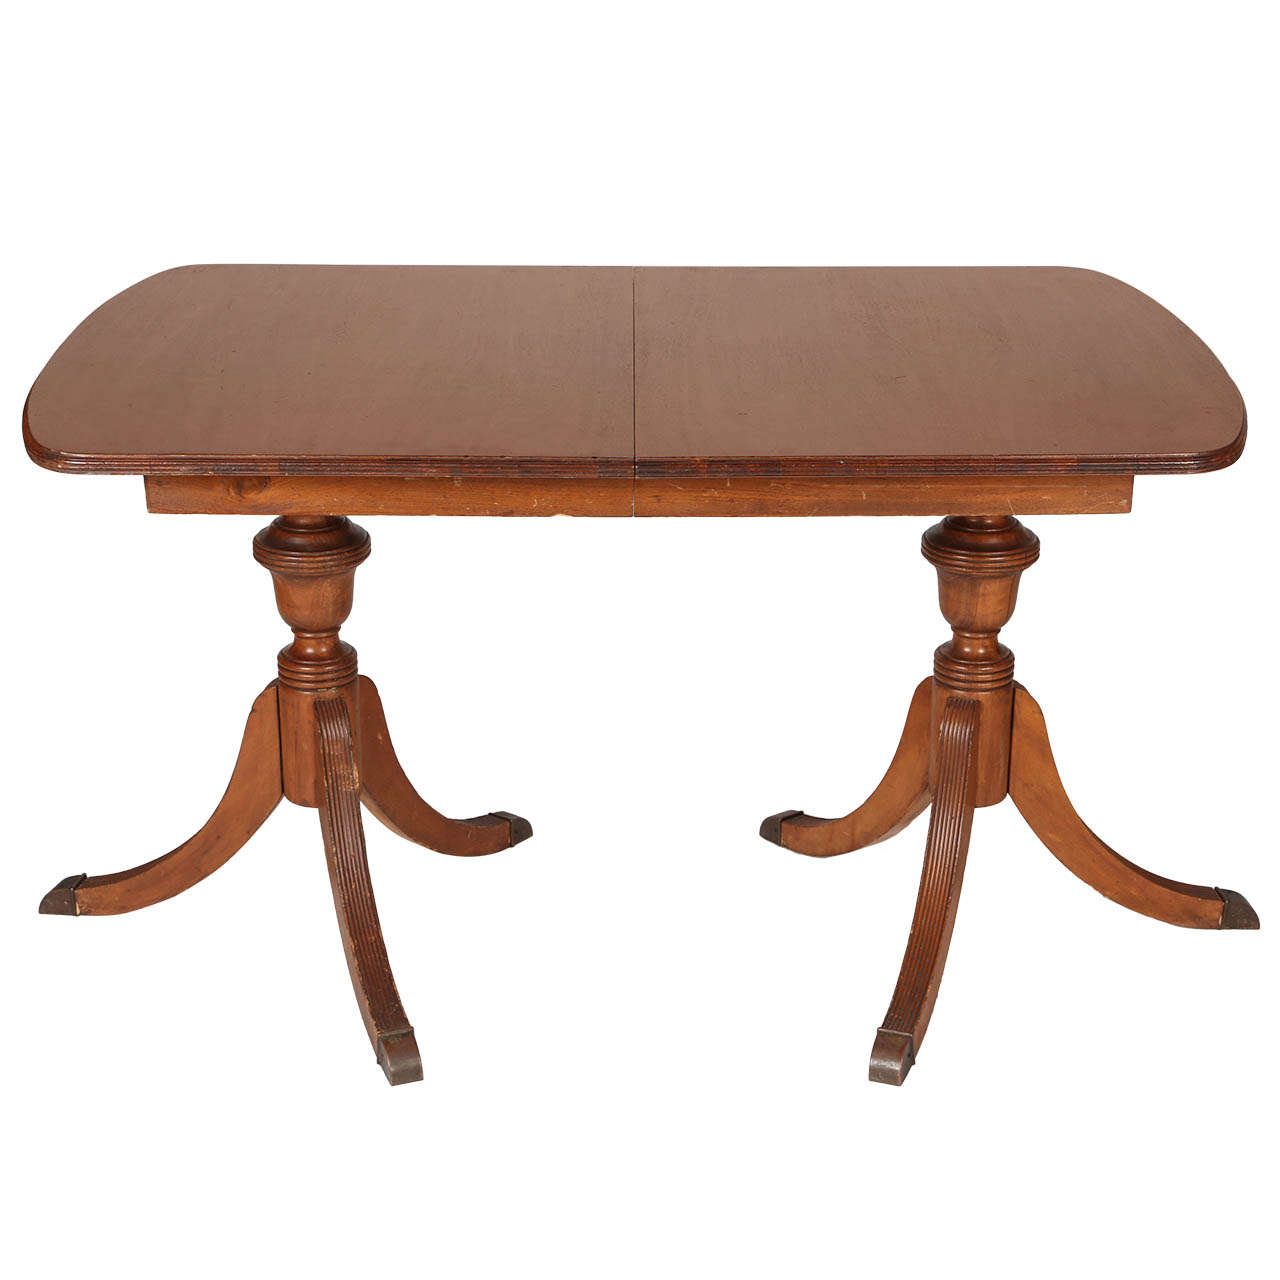 Duncan Phyfe Dining Table For, Duncan Phyfe Dining Room Set